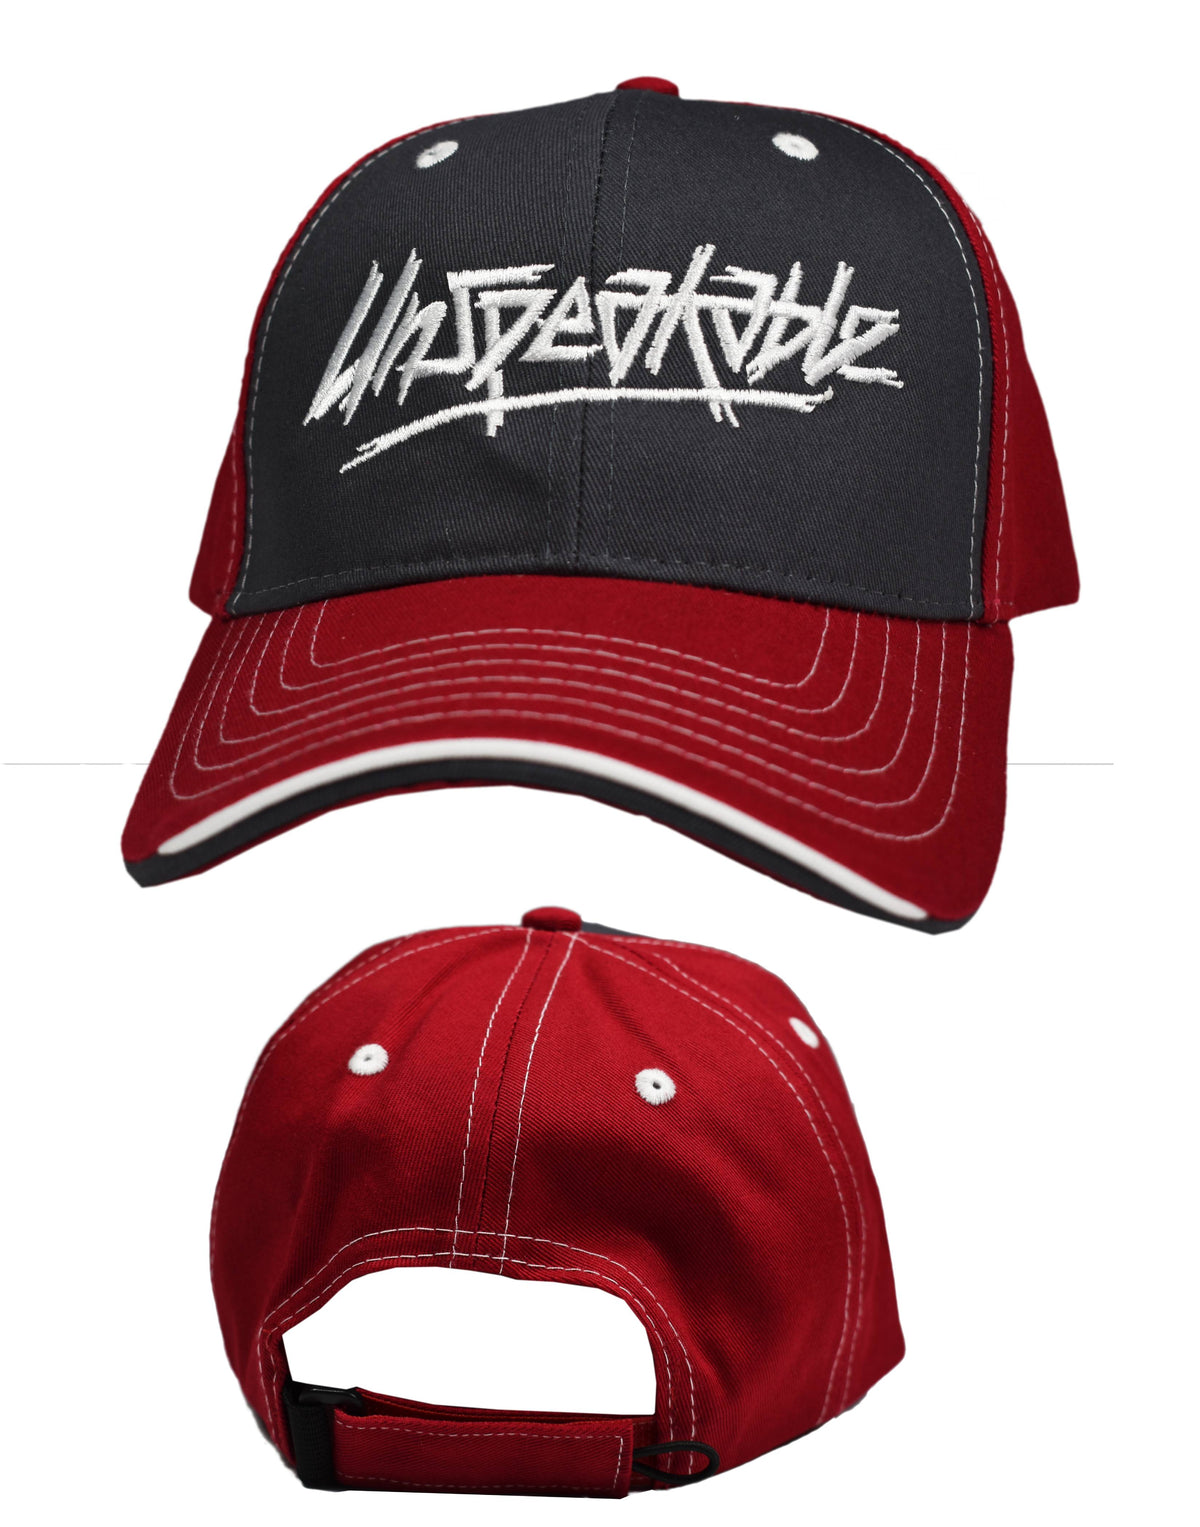 Hats - New and Classic UnspeakableGaming Hats | UnspeakableGaming